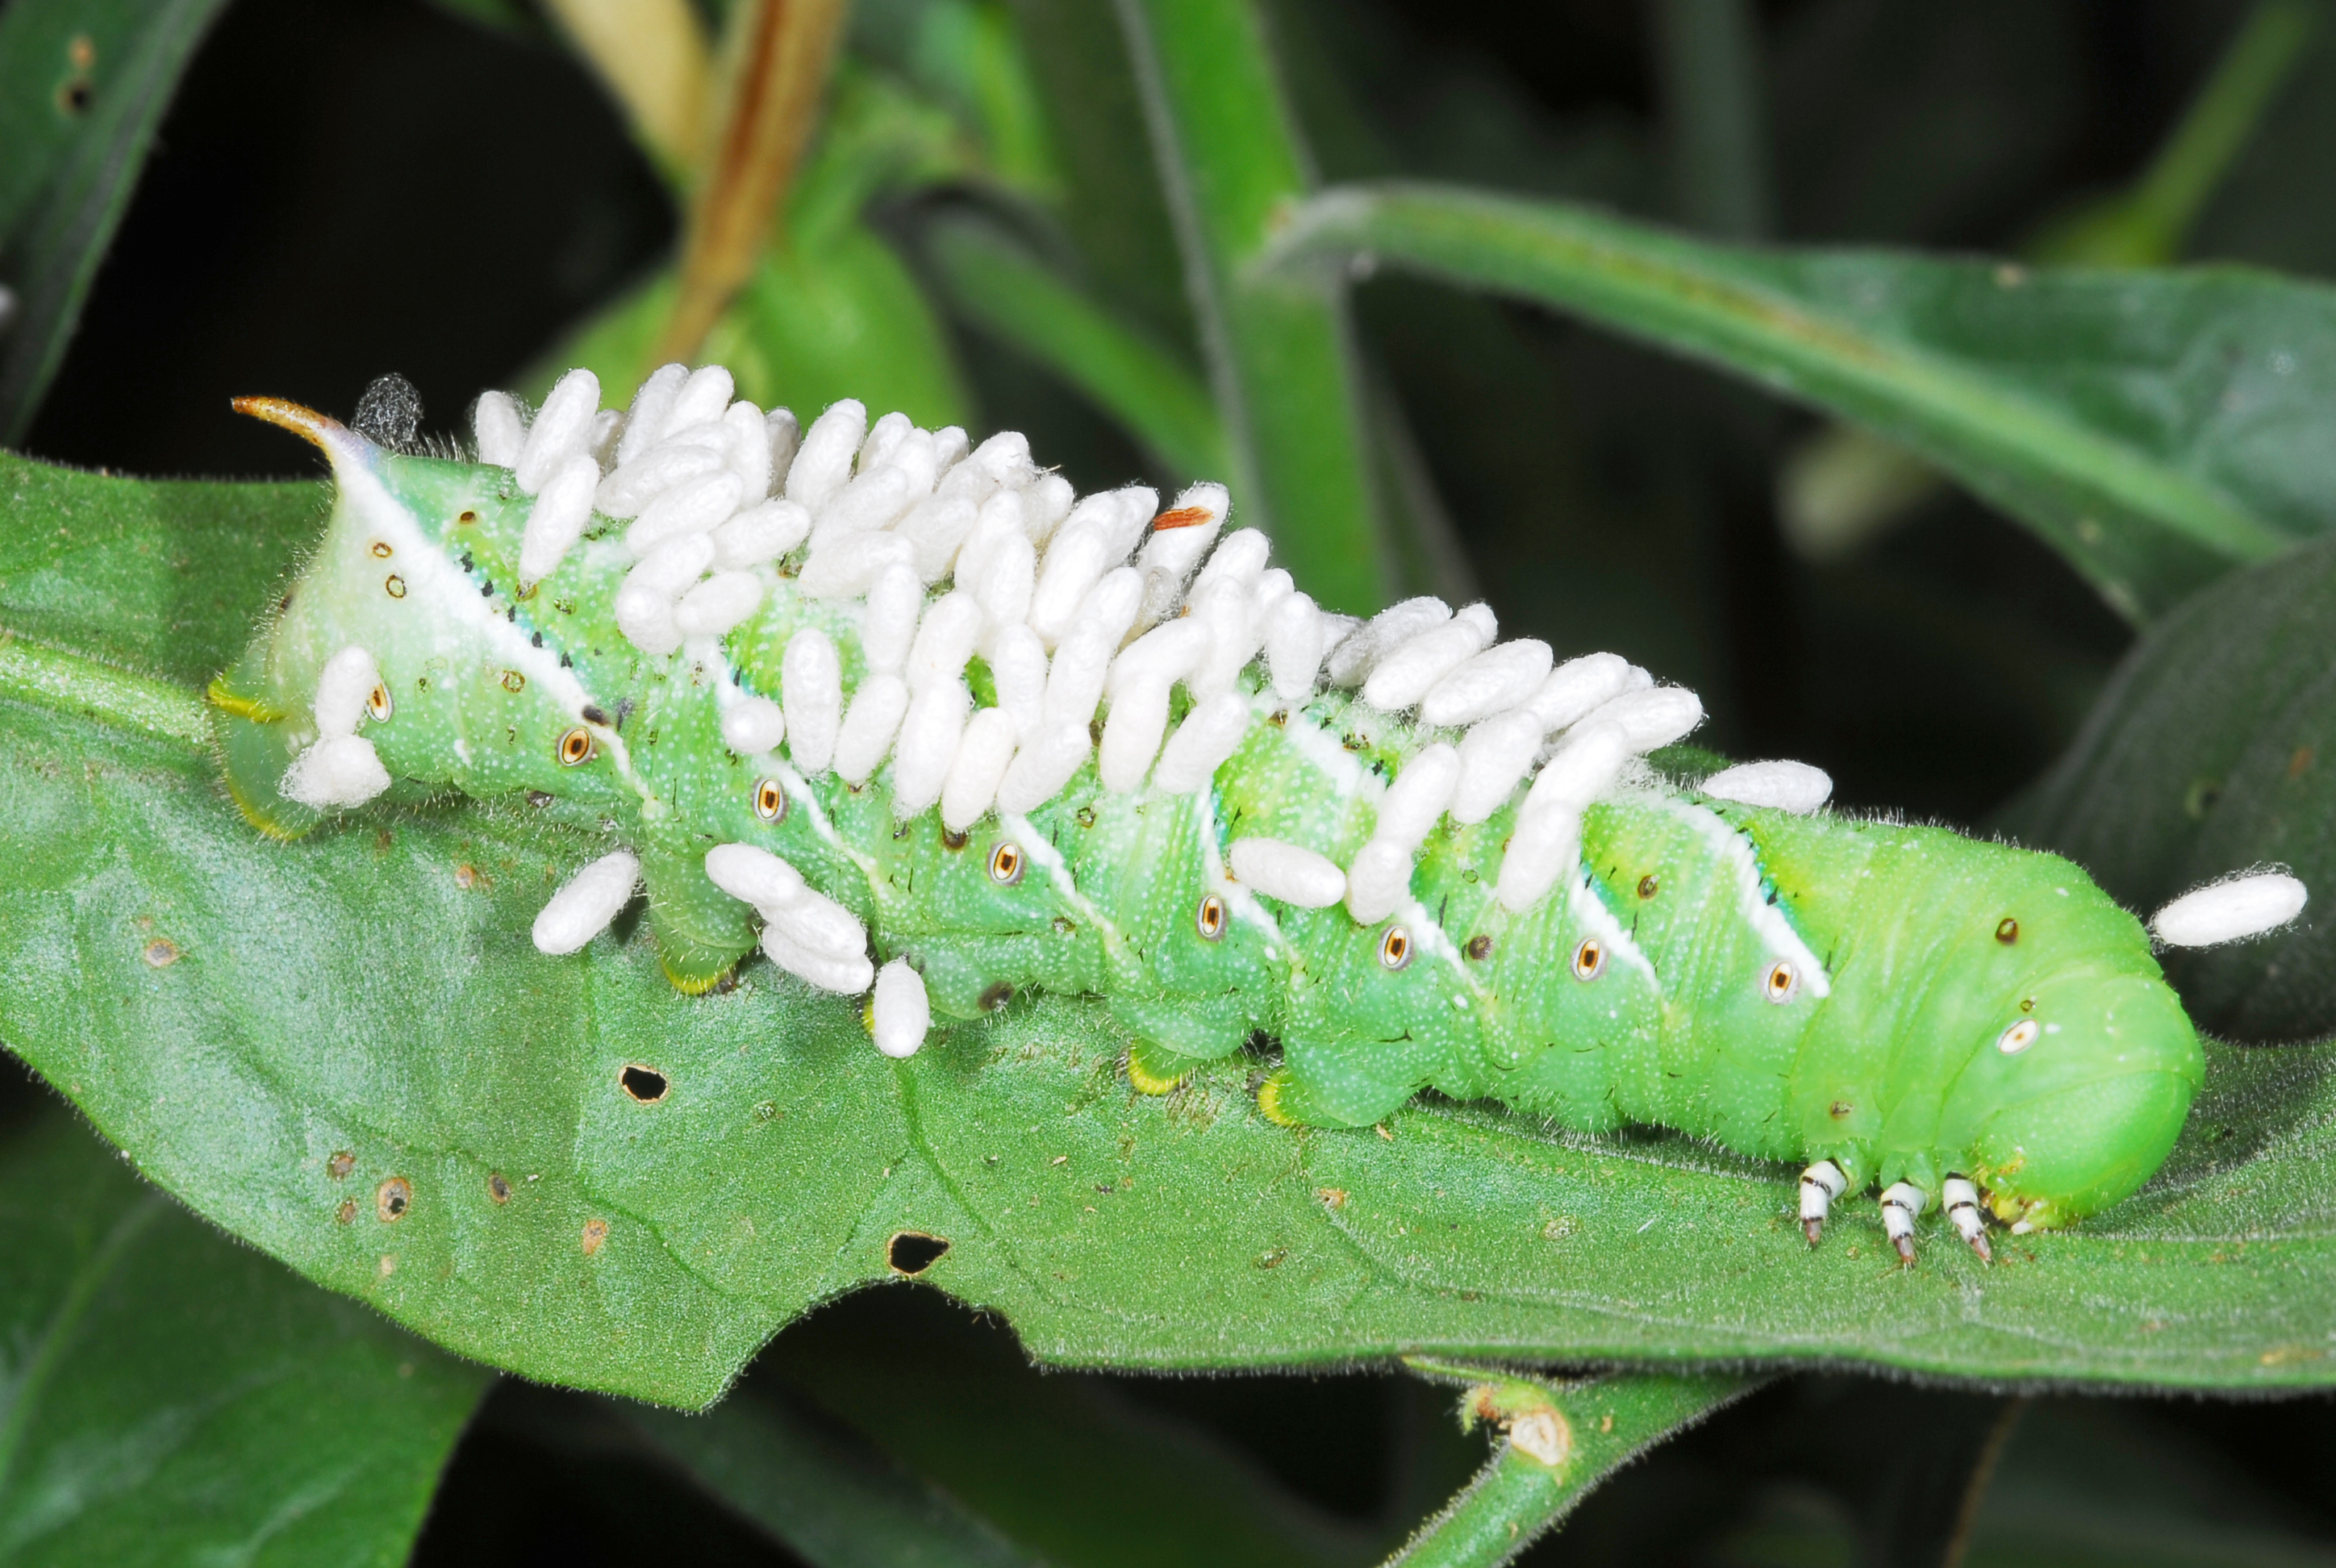 Tobacco hornworm attacked by beneficial wasp.